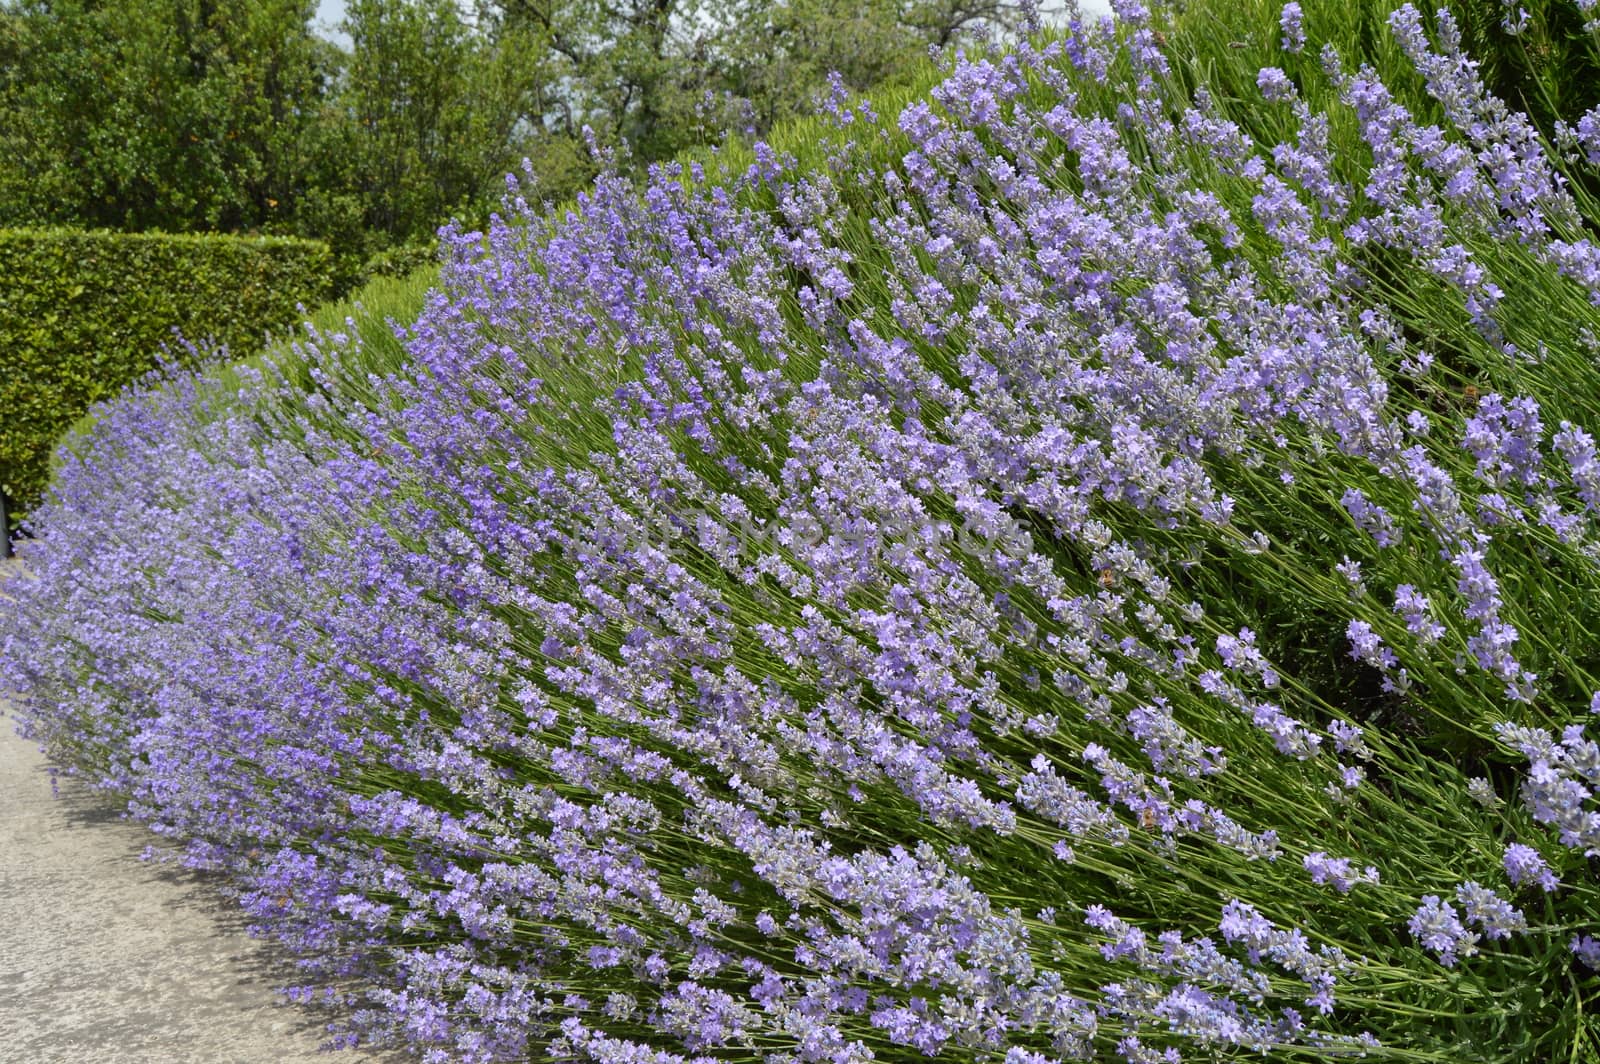 Beautiful flowering lavender in the garden, floral background lilac and green.